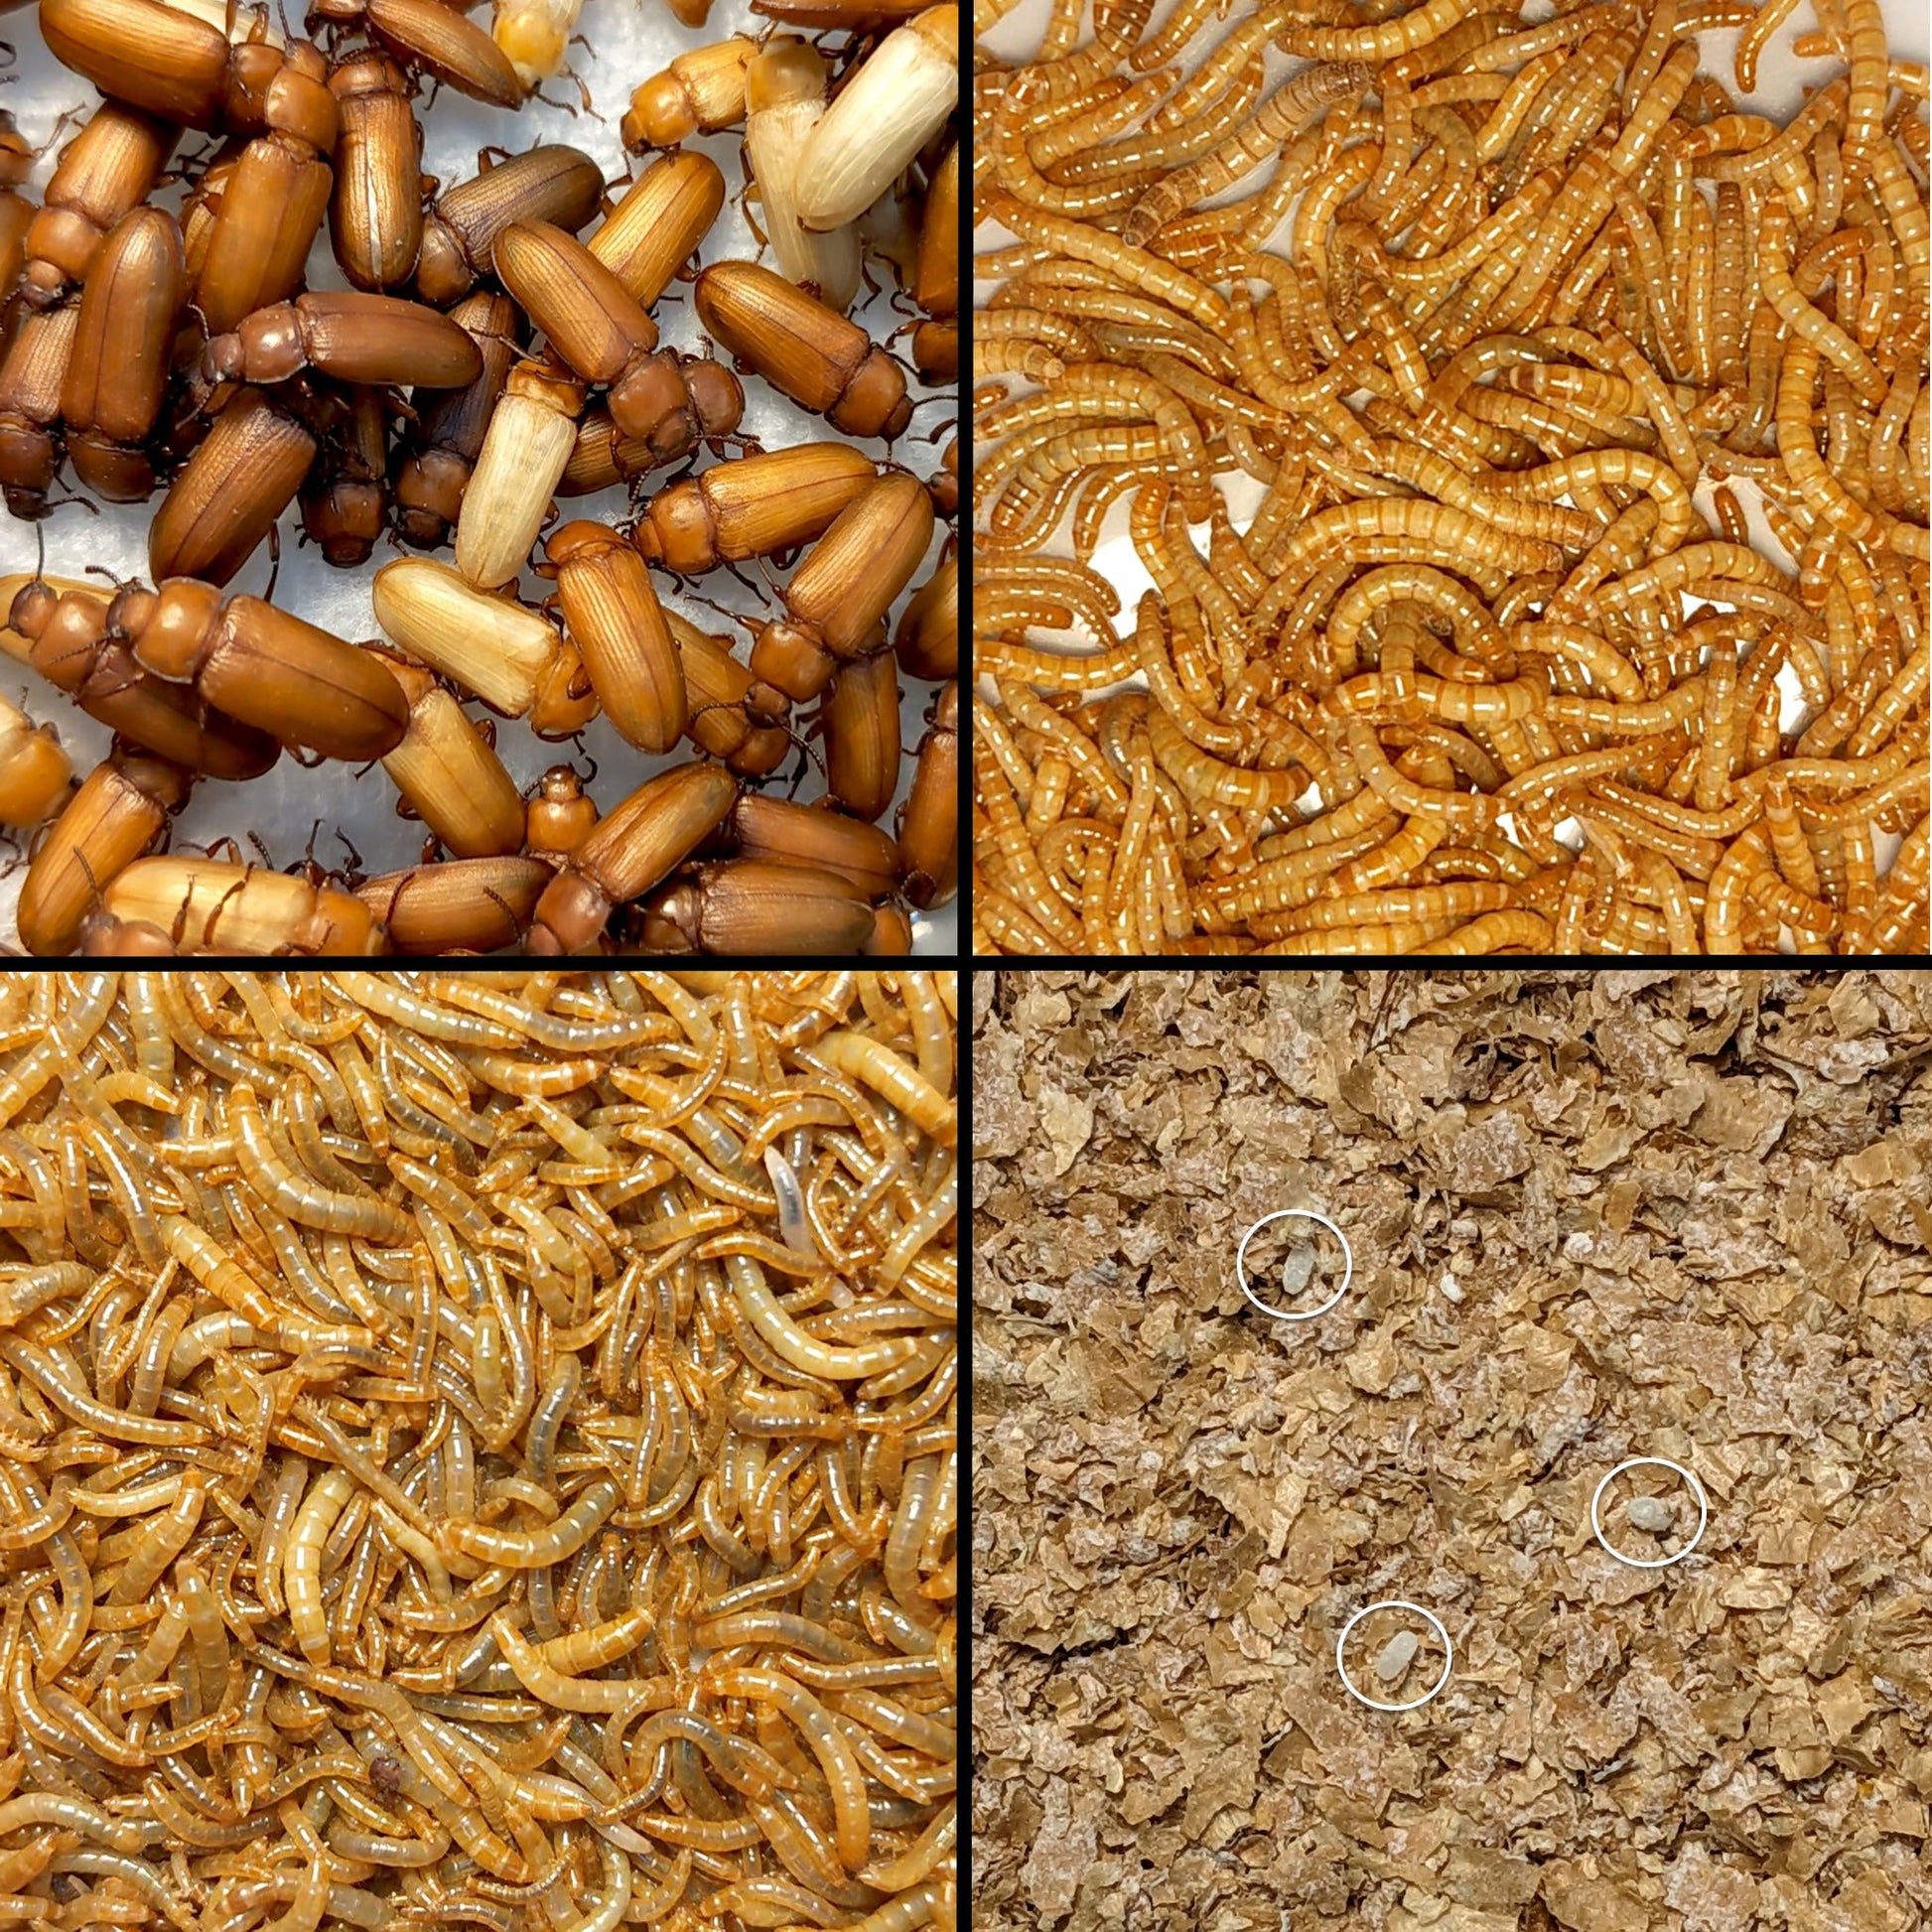 Close-up of beetles, worms and eggs in mealworm kits